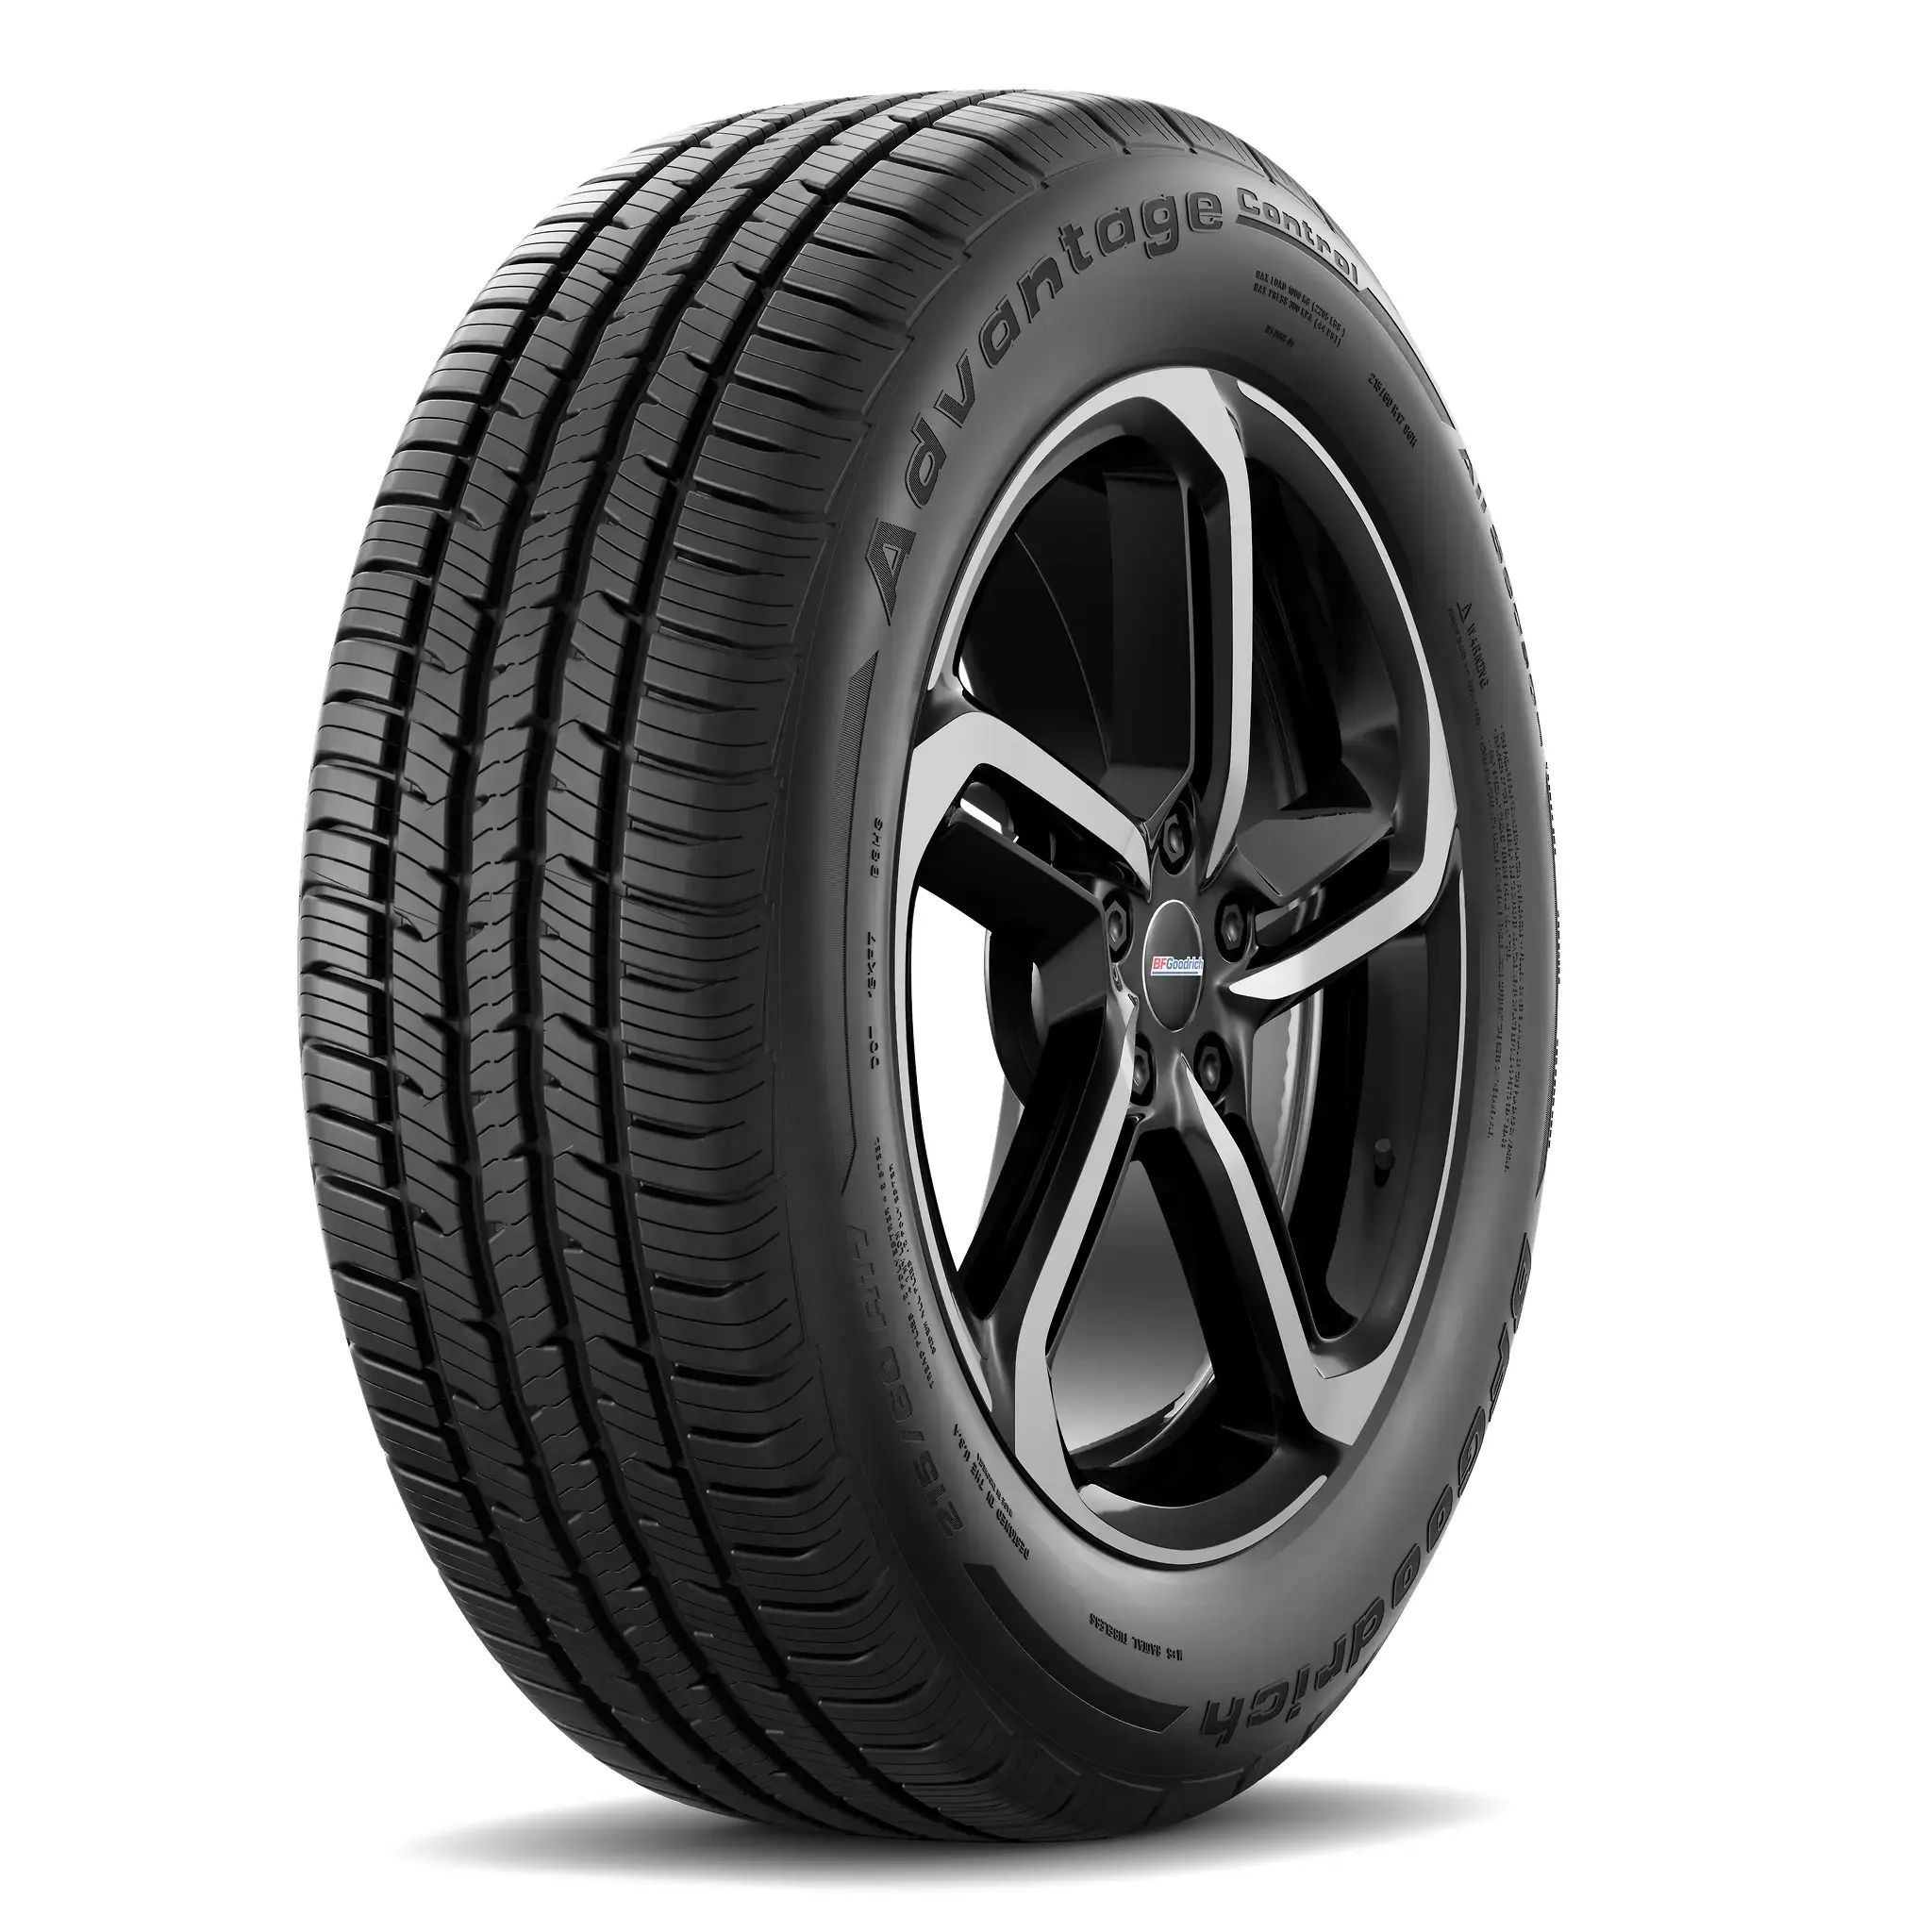 Cheap sales Used tires, Second Hand Tyres, Perfect Used Car Tyres In Bulk FOR SALE